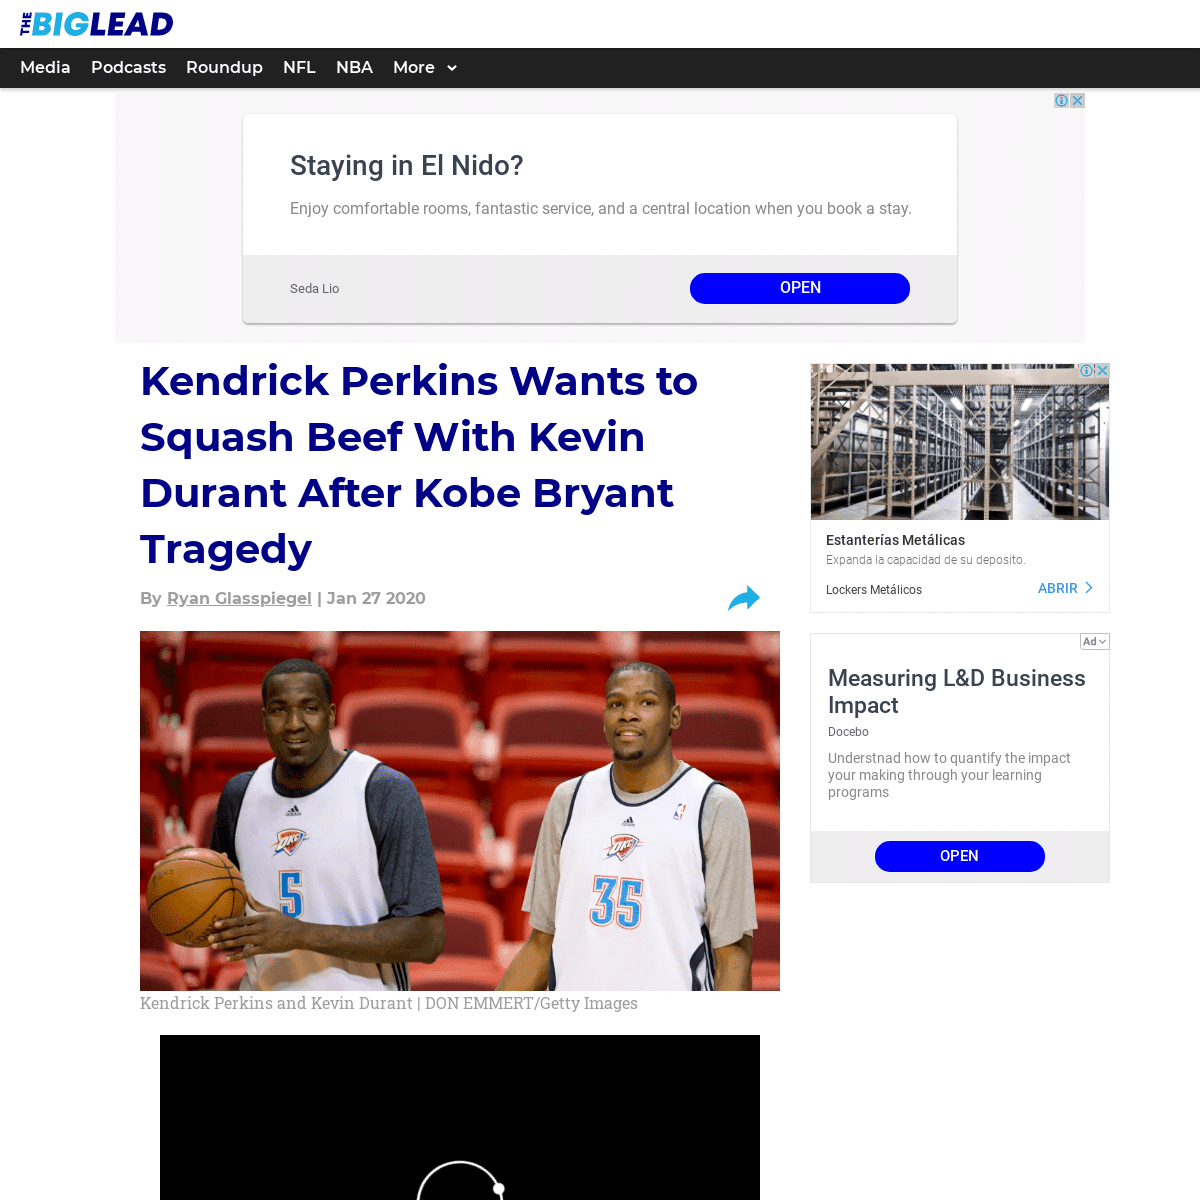 A complete backup of www.thebiglead.com/posts/kendrick-perkins-kevin-durant-beef-kobe-bryant-tweets-01dzky0e6m5q